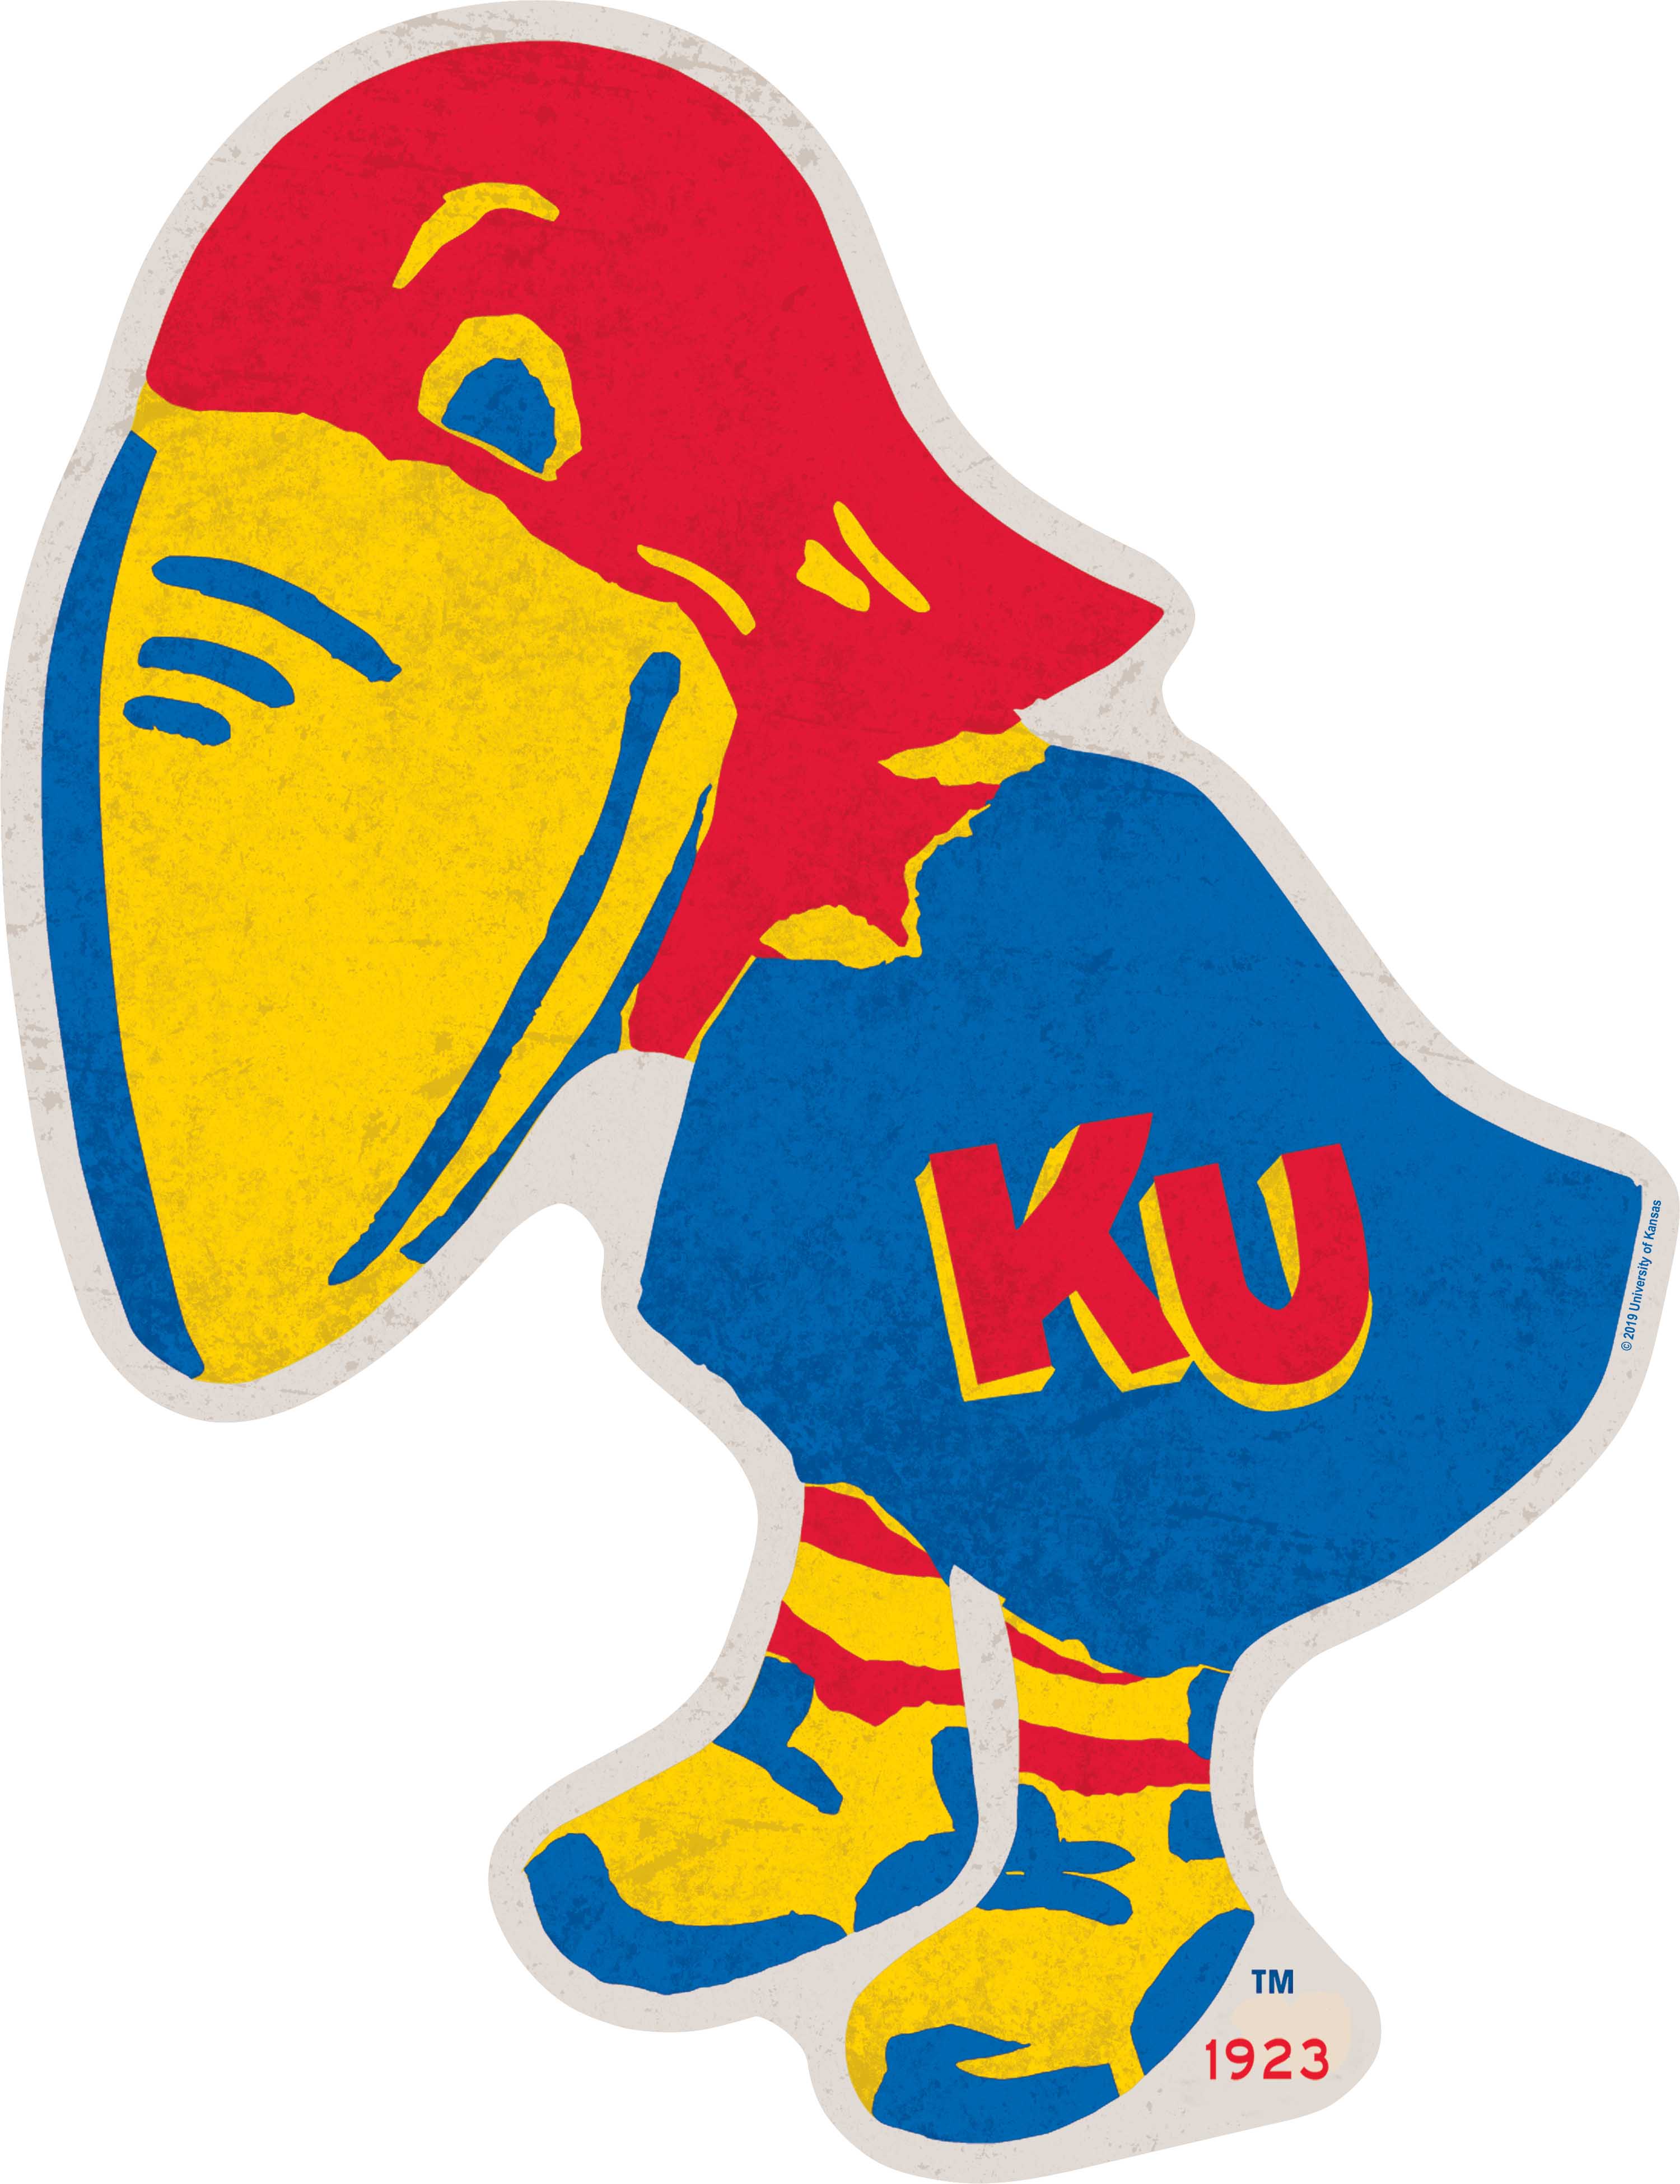 Kansas Jayhawks Logo and symbol, meaning, history, PNG, brand - Clip ...